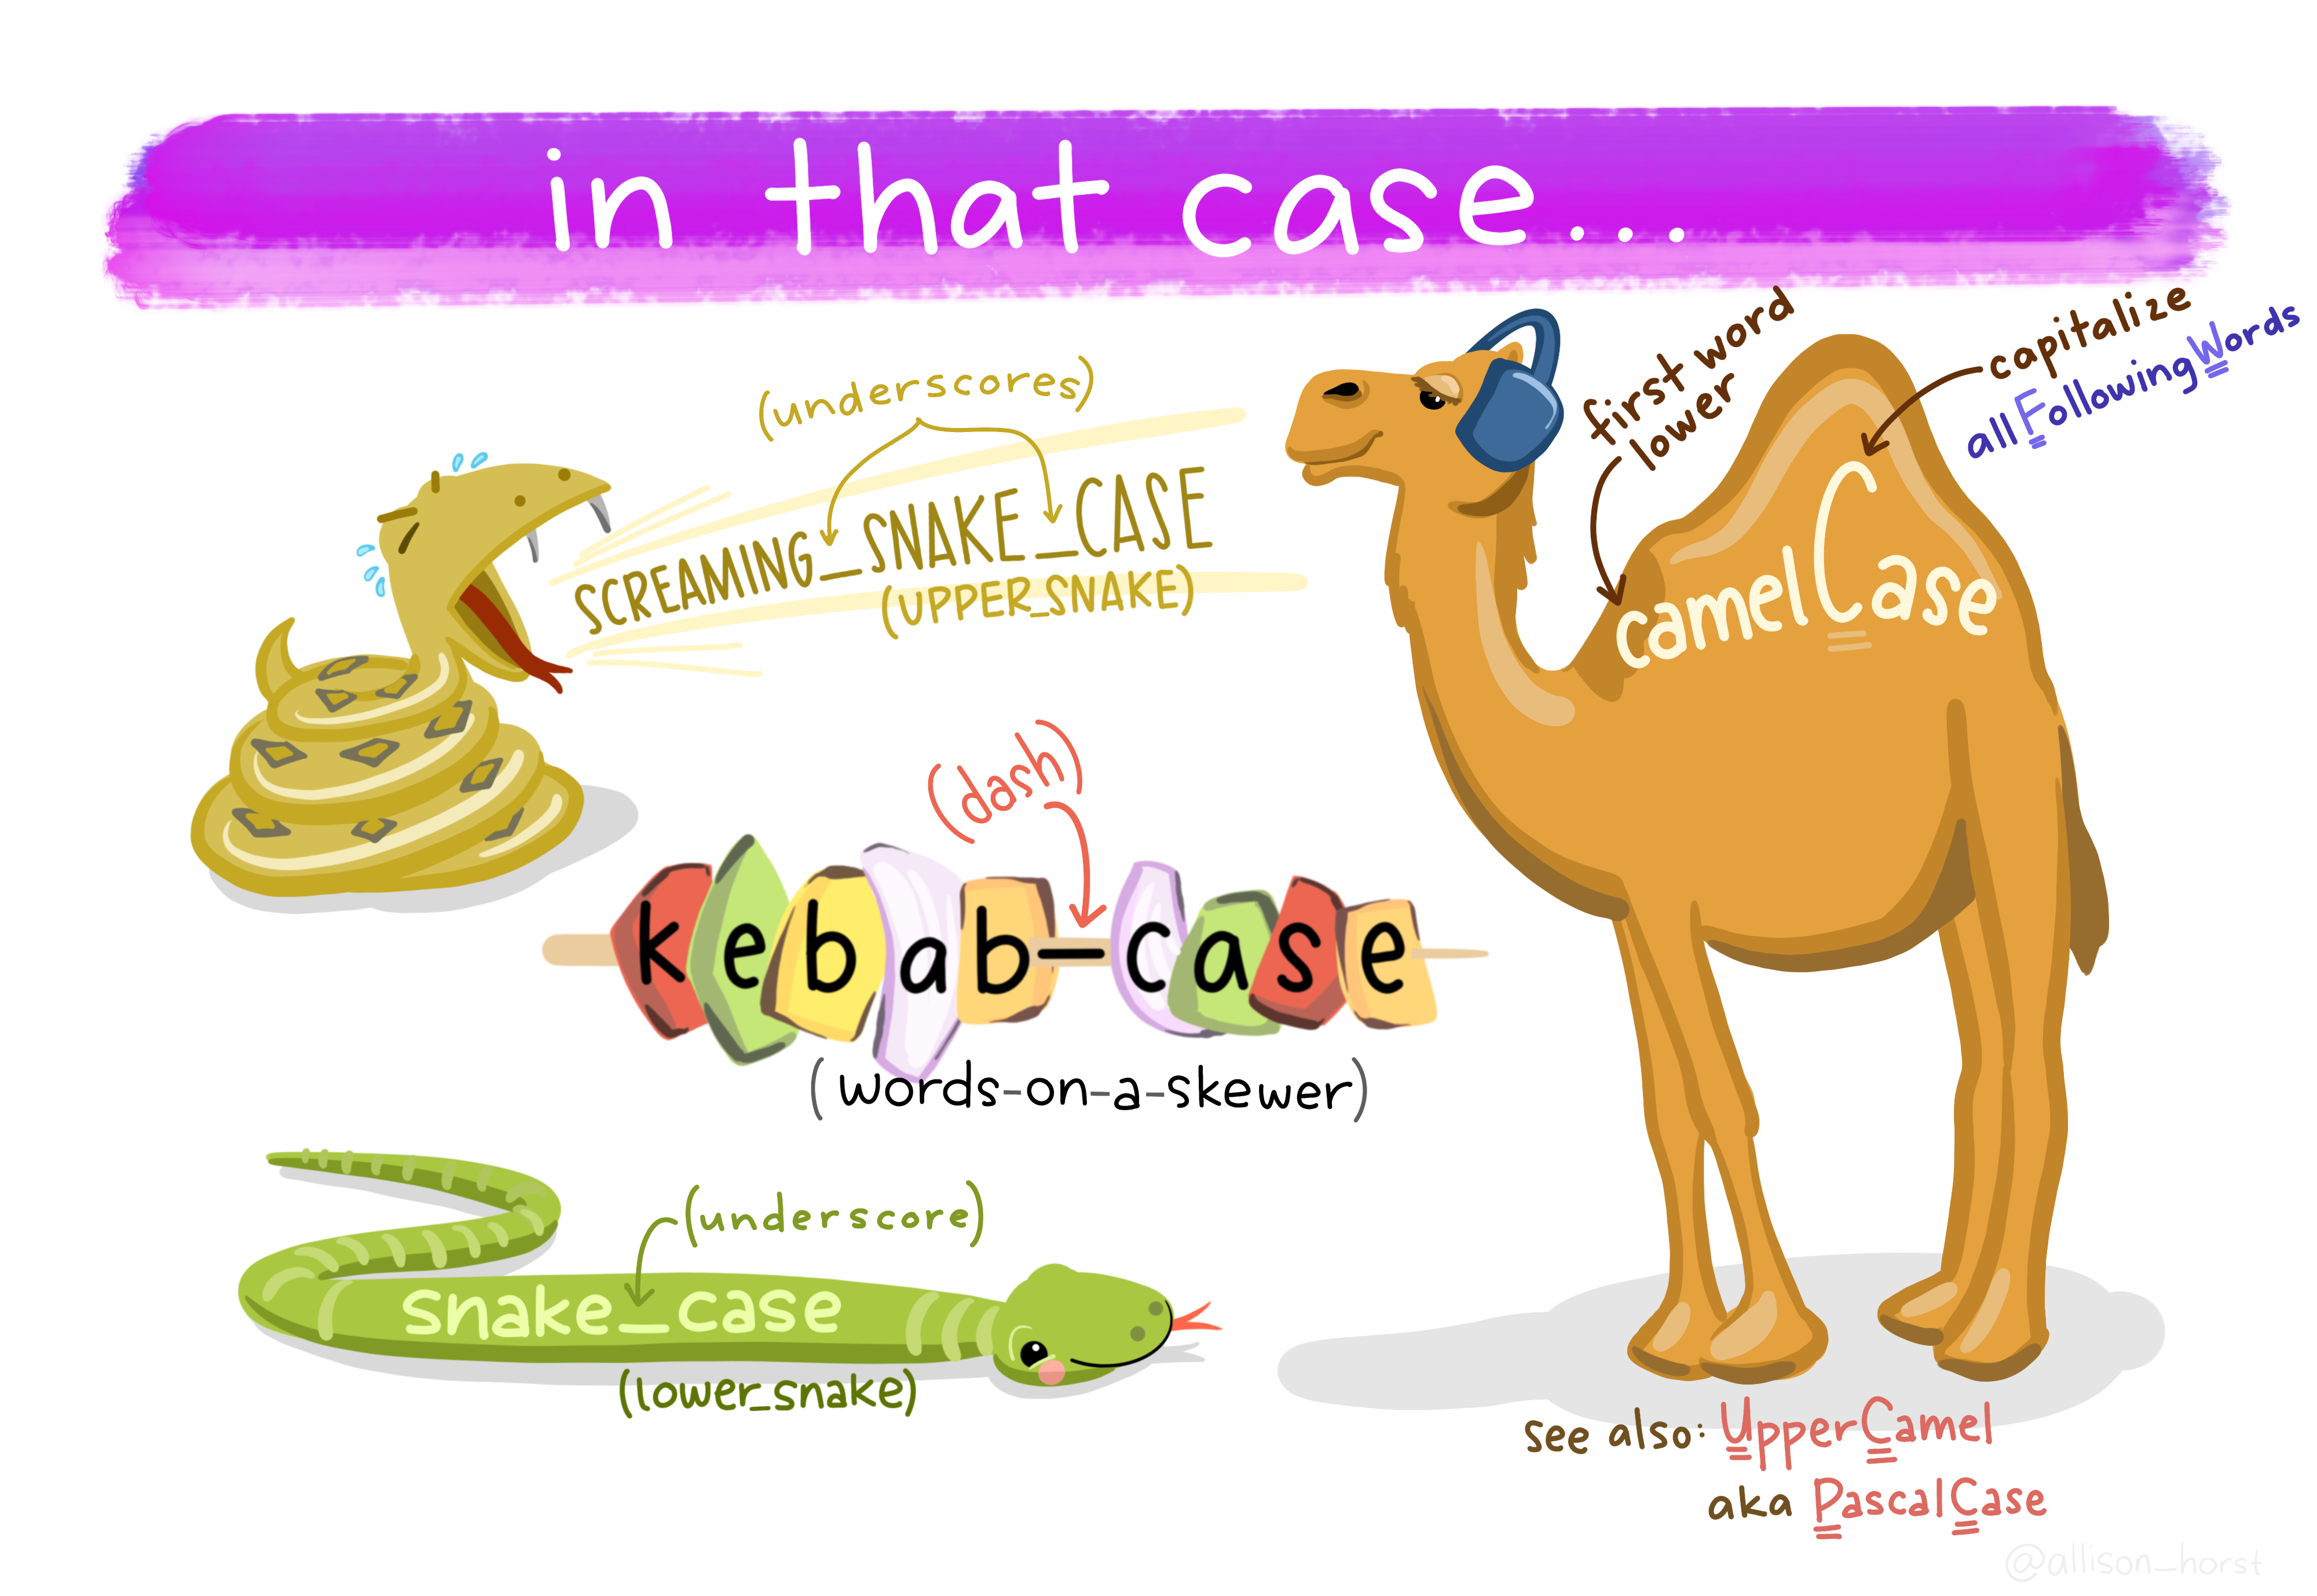 an illustration showing a camel, and the differences between camel, kebab, snake, and other useful cases